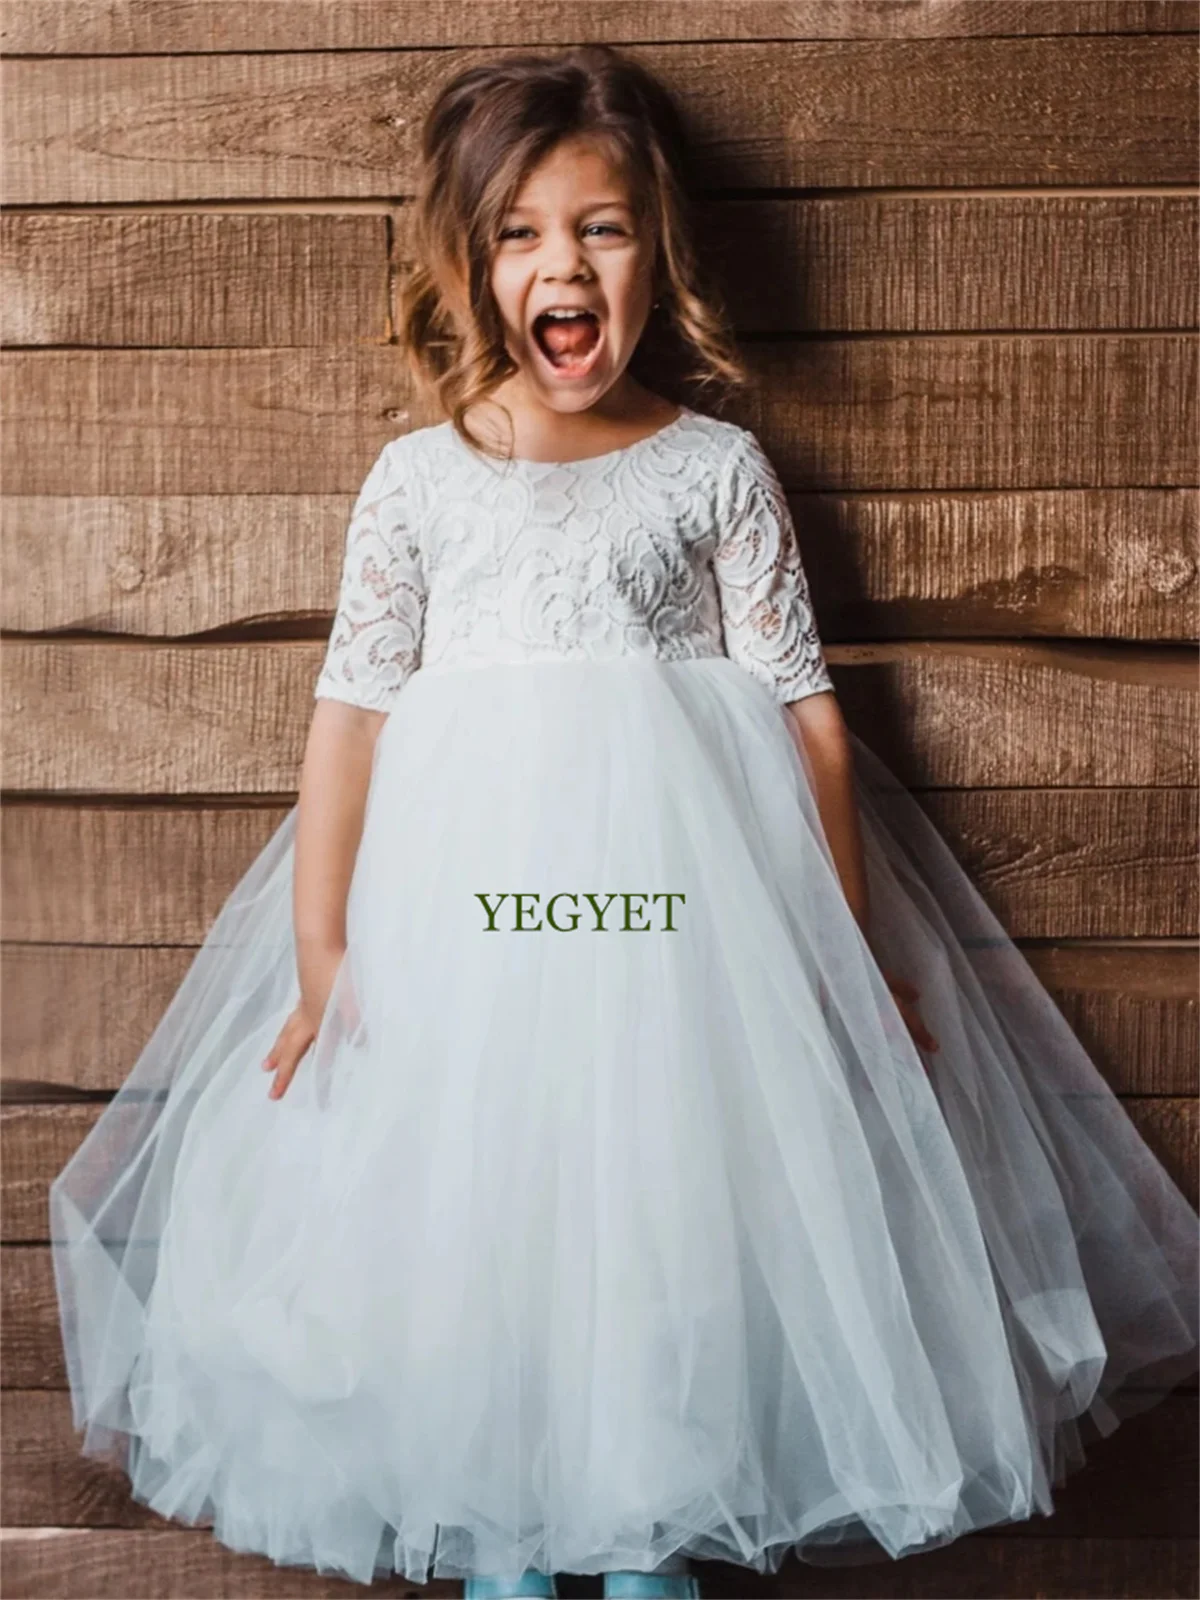 

White Tulle Puffy Flower Girl Dresses Appliques Half Sleeve For Wedding Birthday Party Banquet First Communion Gowns